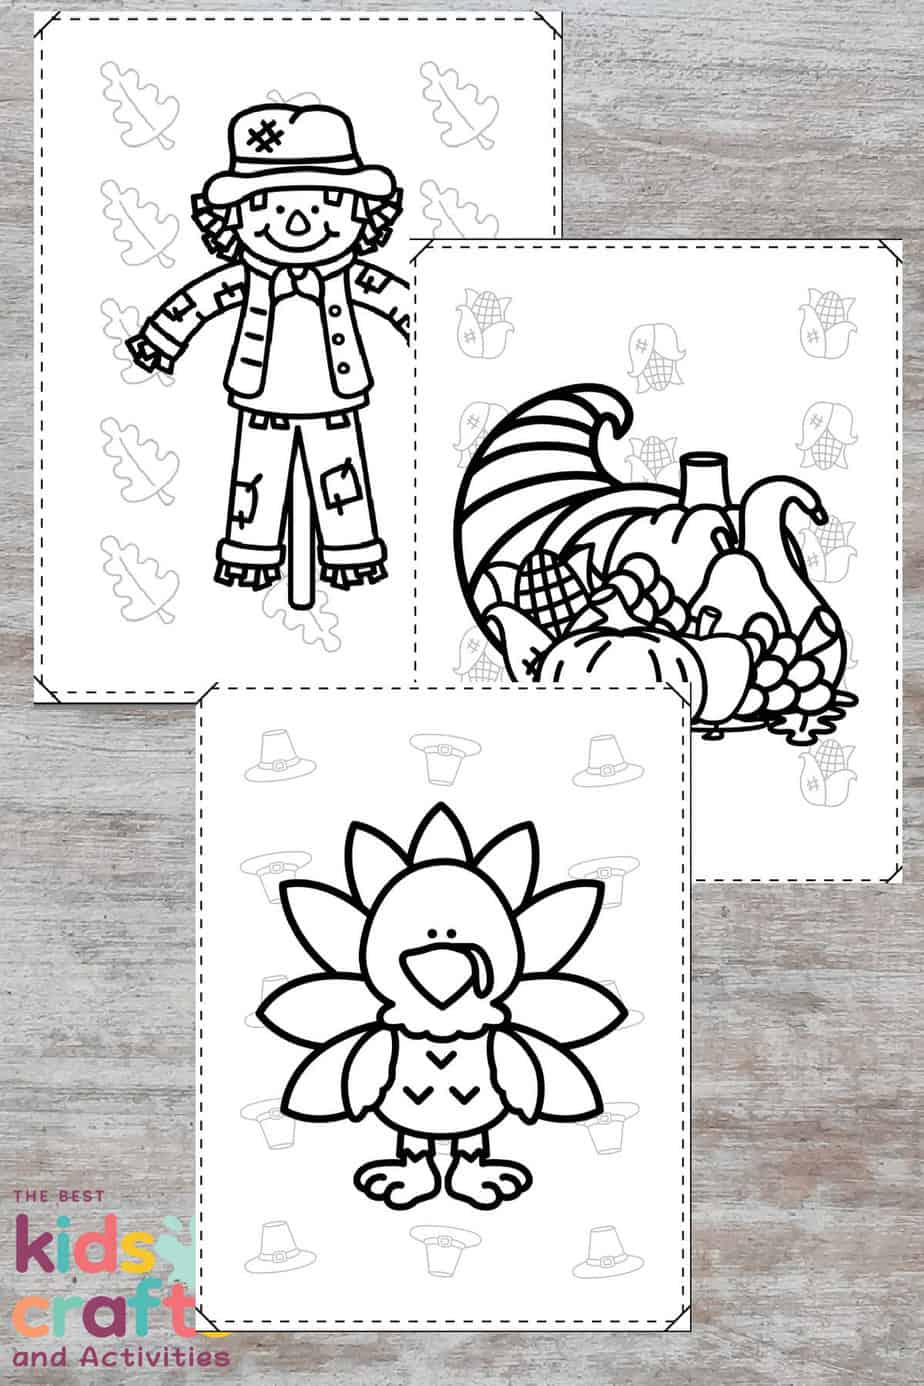 Thanksgiving coloring pages printable for kids â the best kids crafts and activities